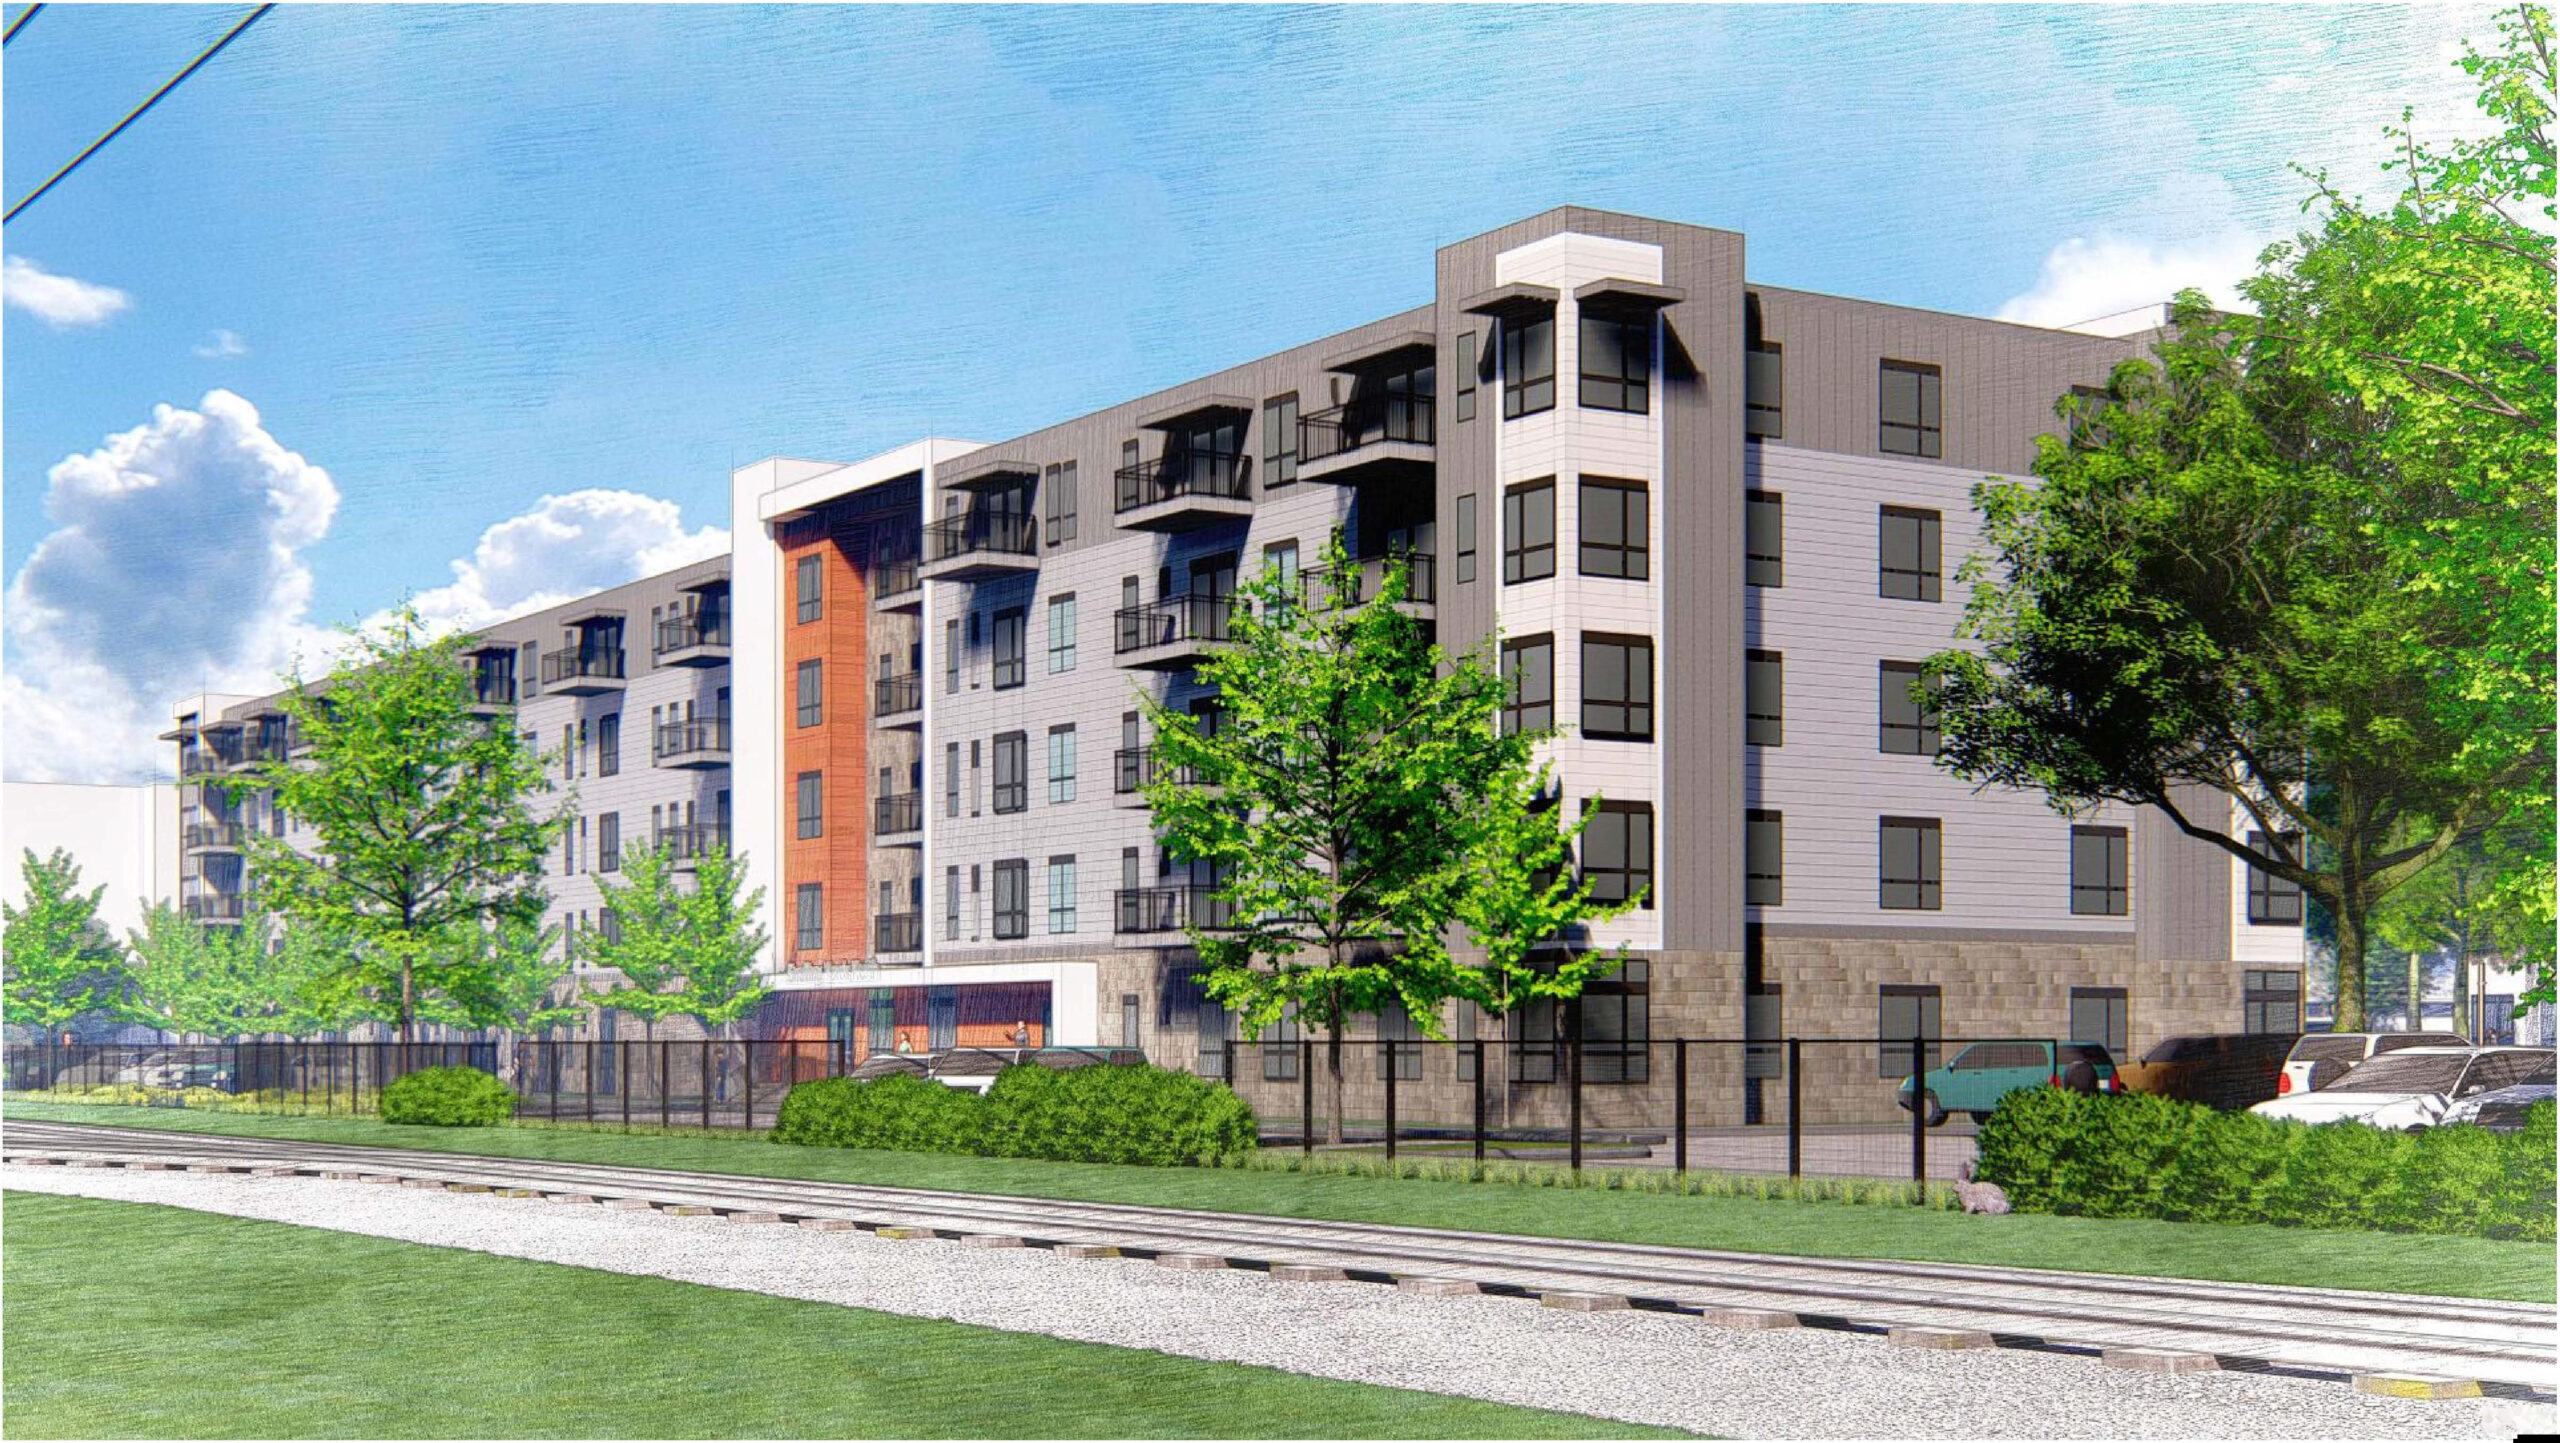 Lupe Development Partners, Wall Cos. to Develop 90-Unit Affordable Housing Community in Minneapolis